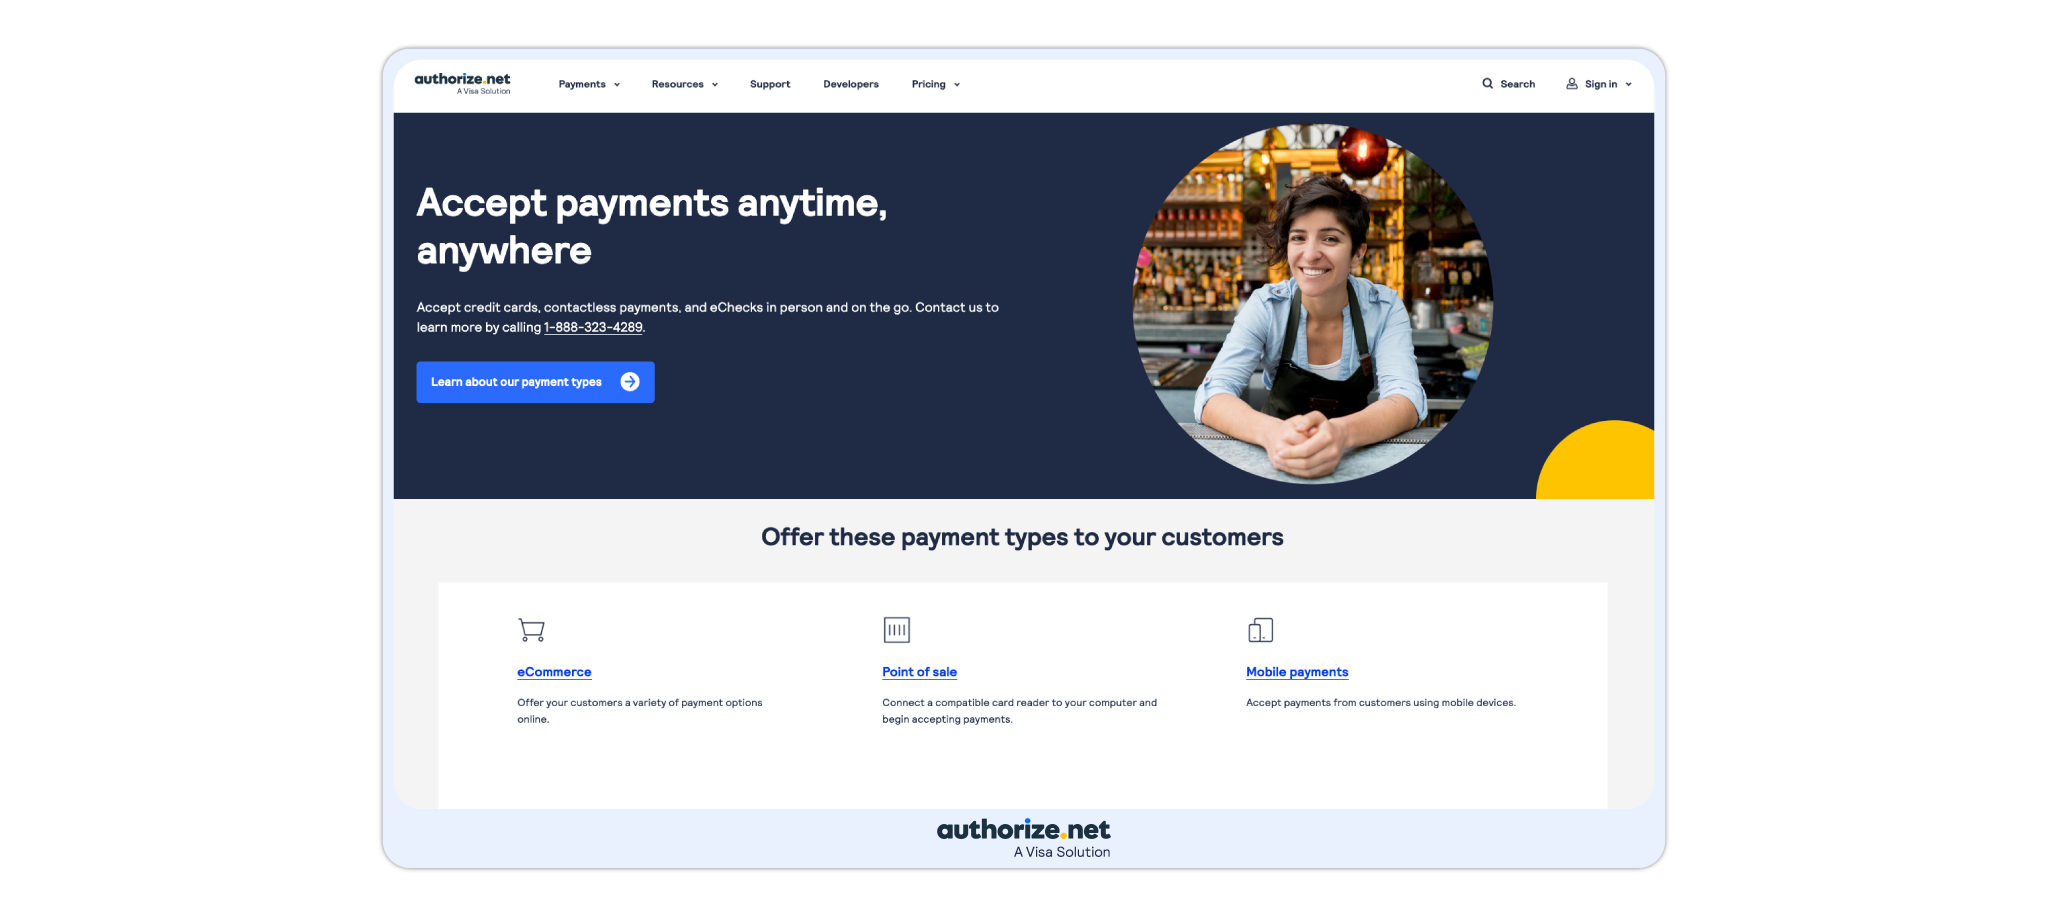 This is the front view of the Aurhorize.net Payment Gateway